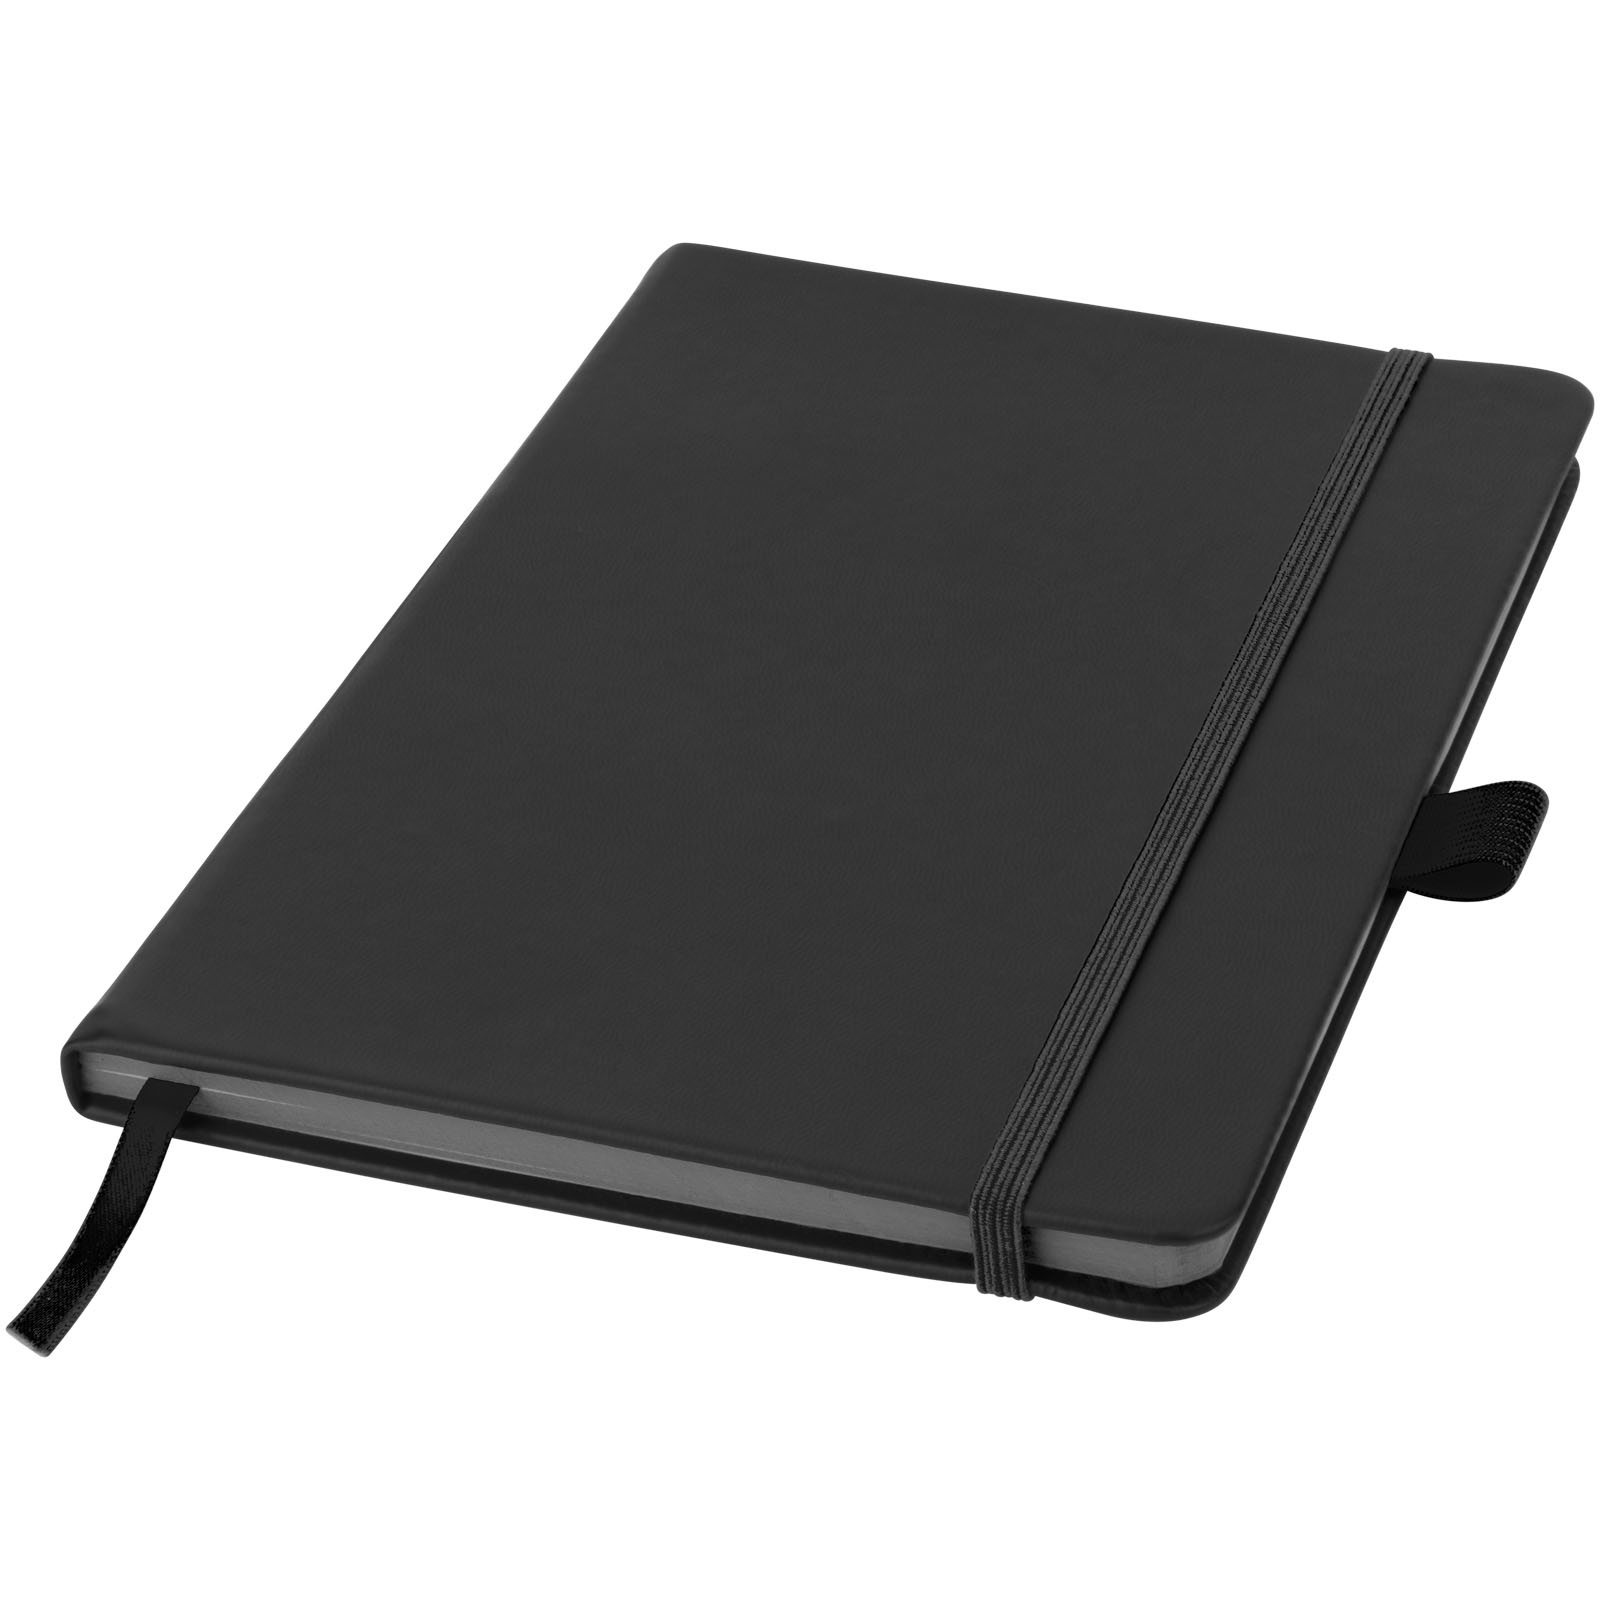 Hard cover notebooks - Colour-edge A5 hard cover notebook